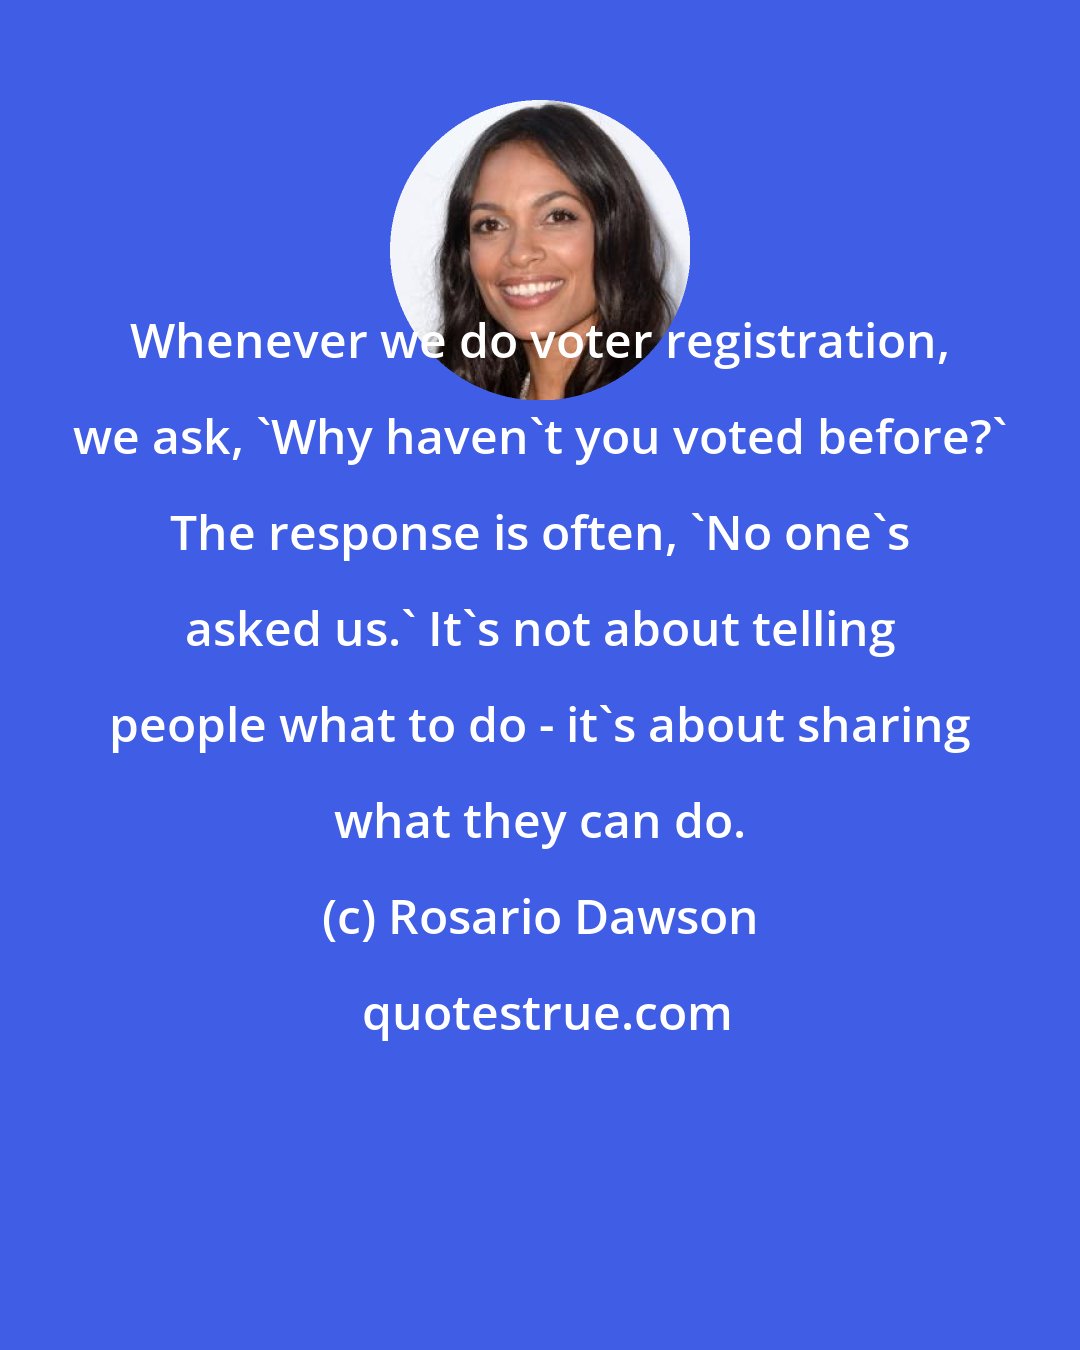 Rosario Dawson: Whenever we do voter registration, we ask, 'Why haven't you voted before?' The response is often, 'No one's asked us.' It's not about telling people what to do - it's about sharing what they can do.